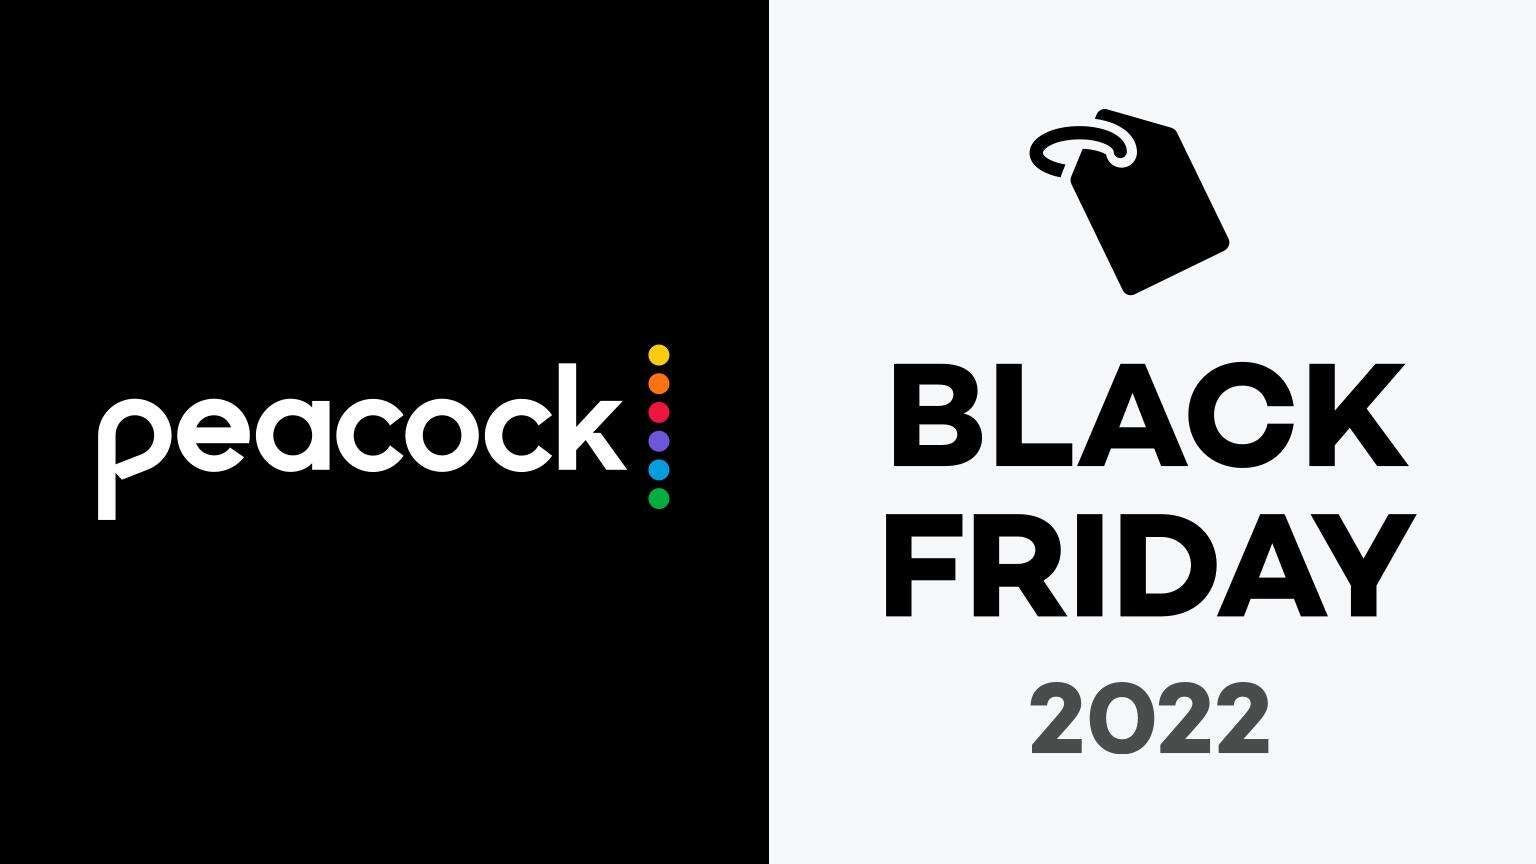 Peacock Black Friday & Cyber Monday 2022 Deals What Are the Best Ways